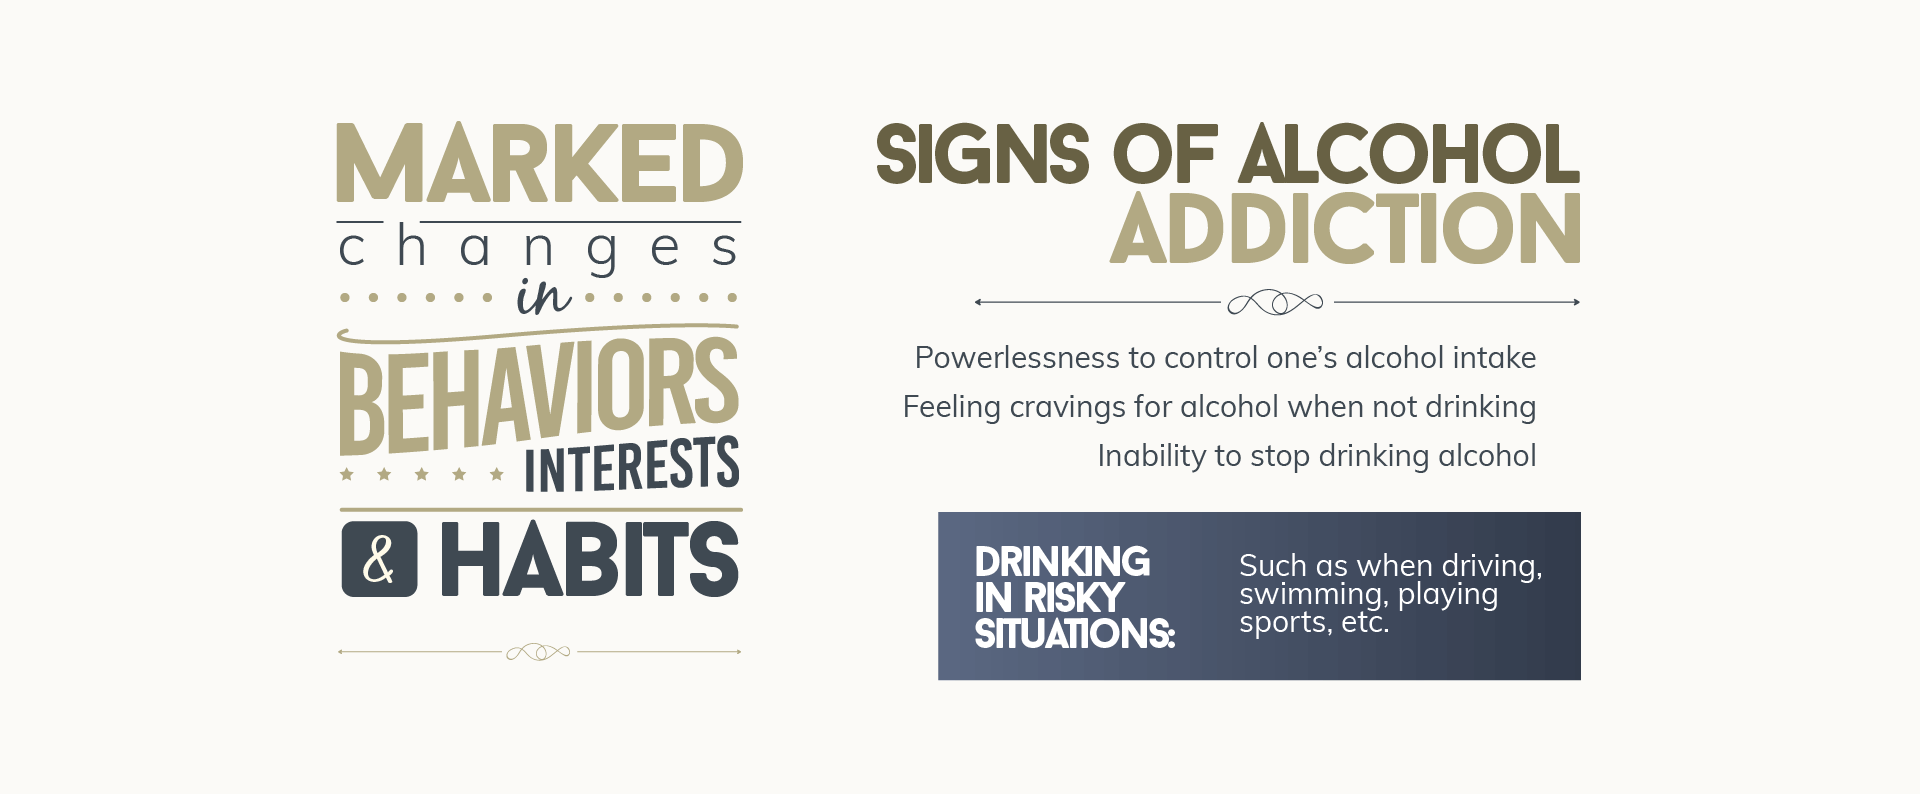 Powerlessness to control alcohol intake, feeling cravings for alcohol when not drinking and inability to stop drinking alcohol, drinking in risky situations such as when driving, swimming or playing sports are signs of alcohol addiction.